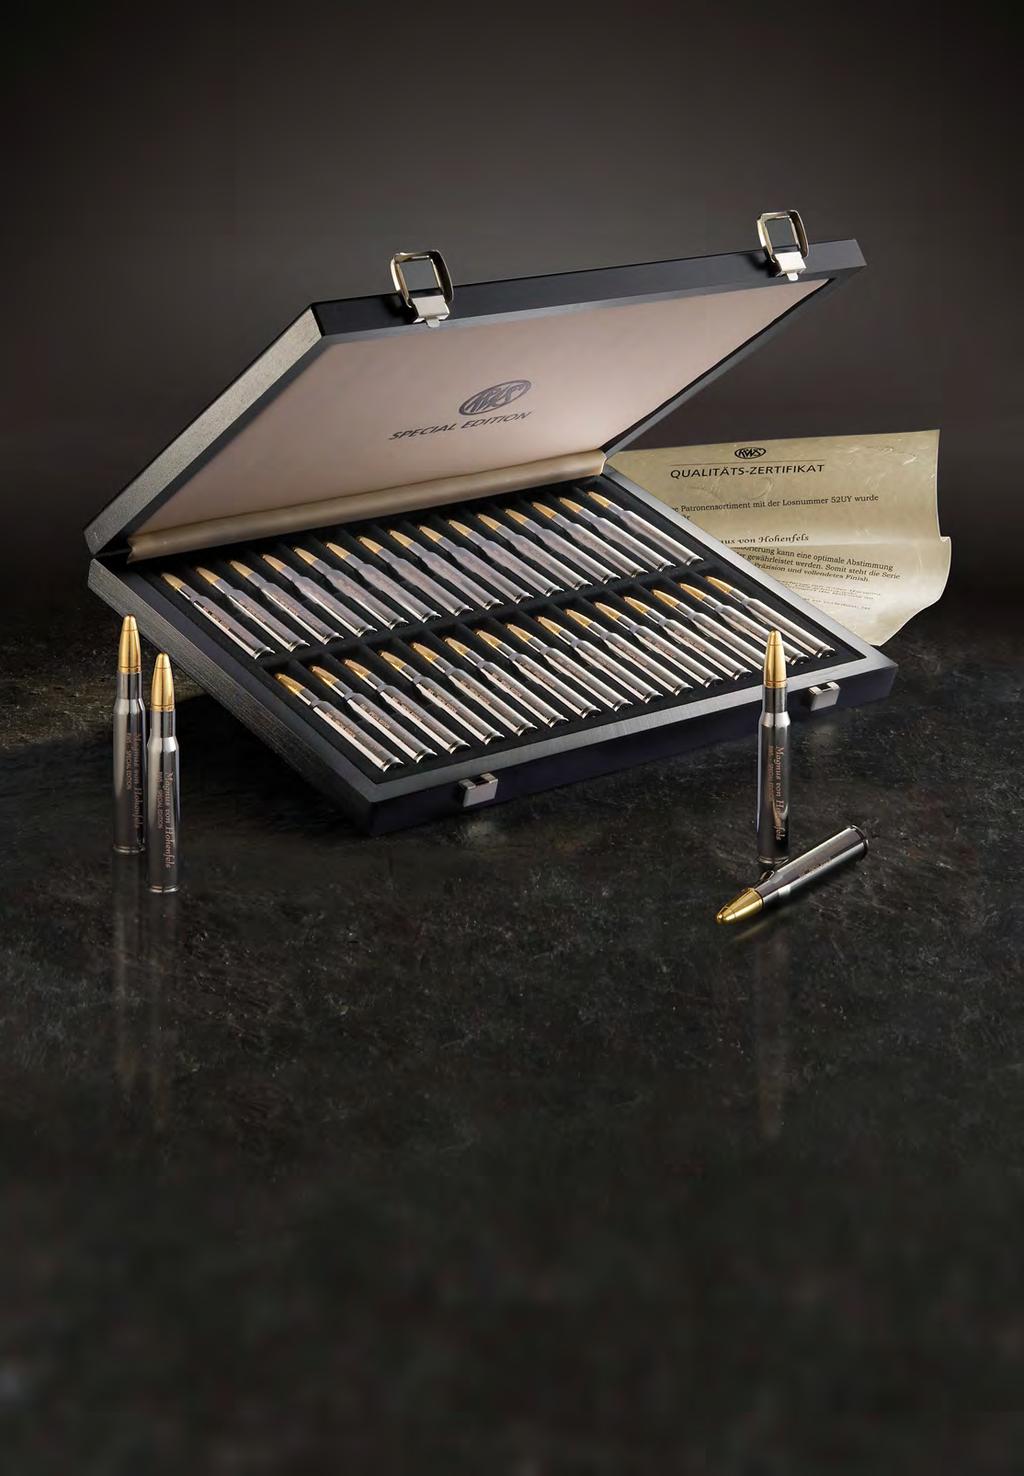 20 AMMUNITION RWS RWS AMMUNITION 21 SPECIAL EDITION A very personal masterpiece This exclusive special series, available in four classic hunting calibres, is a true rarity.